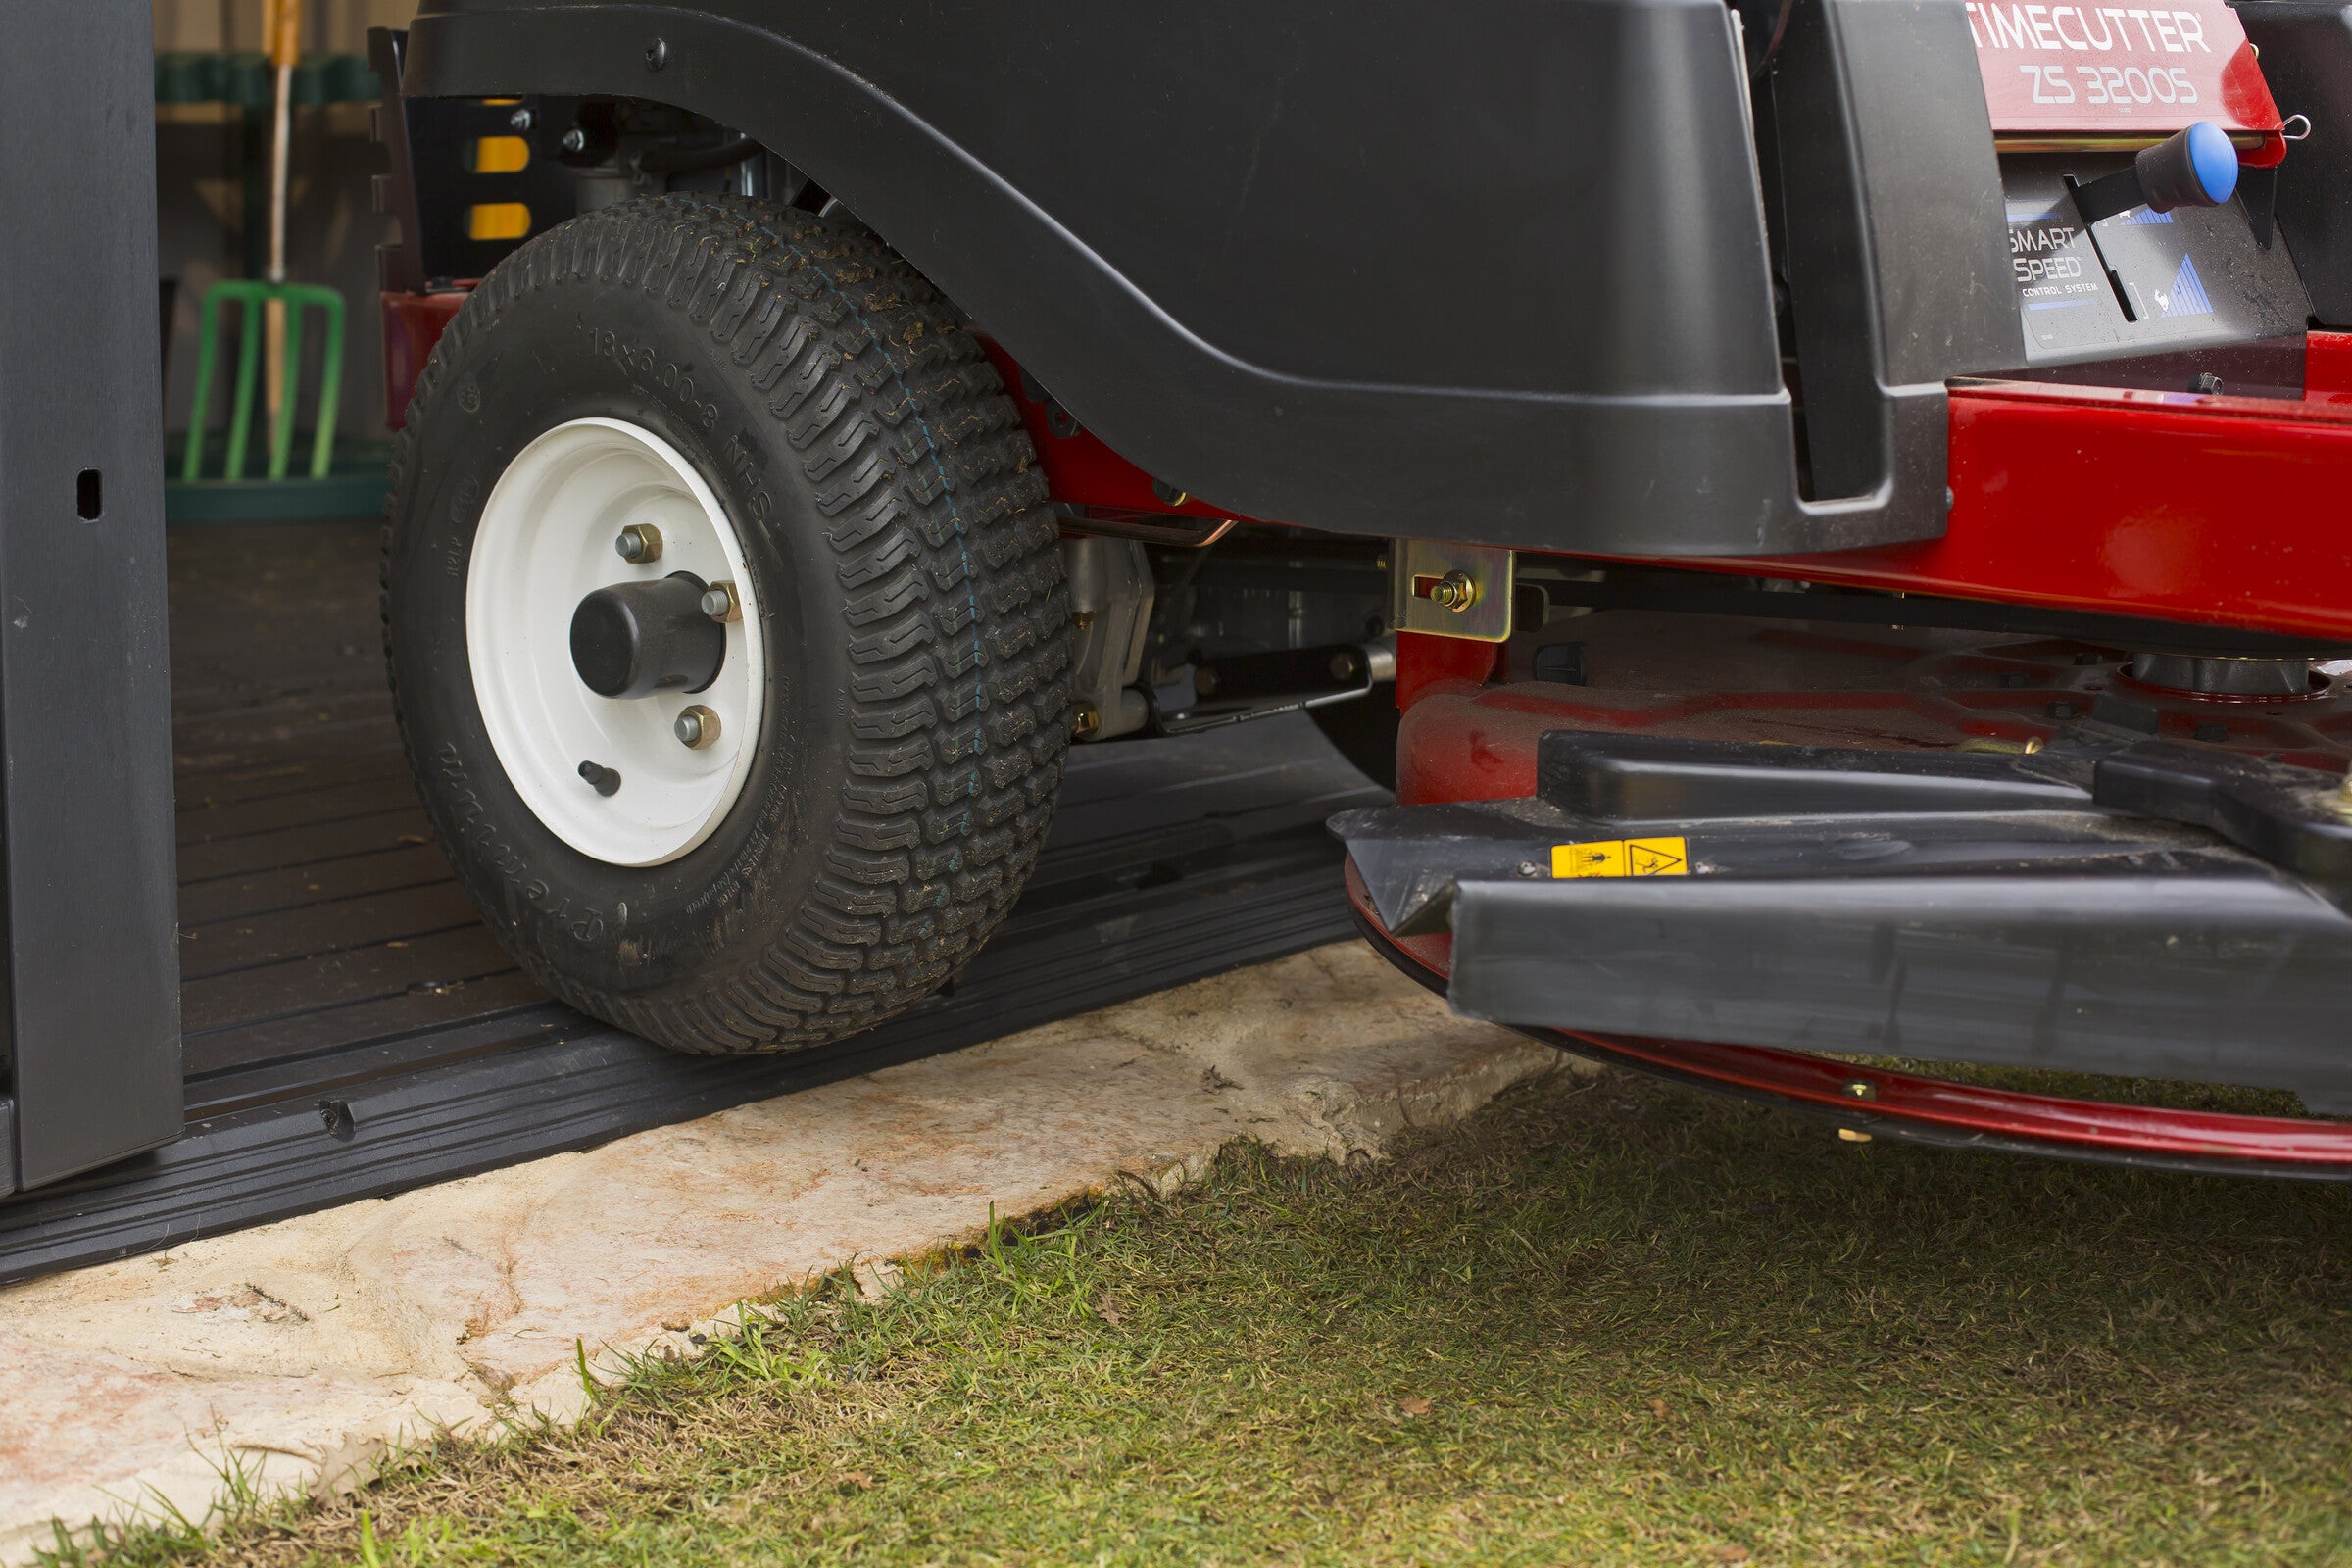 Easy Access for lawnmowers with built ramp on the Keter Oakland Sheds